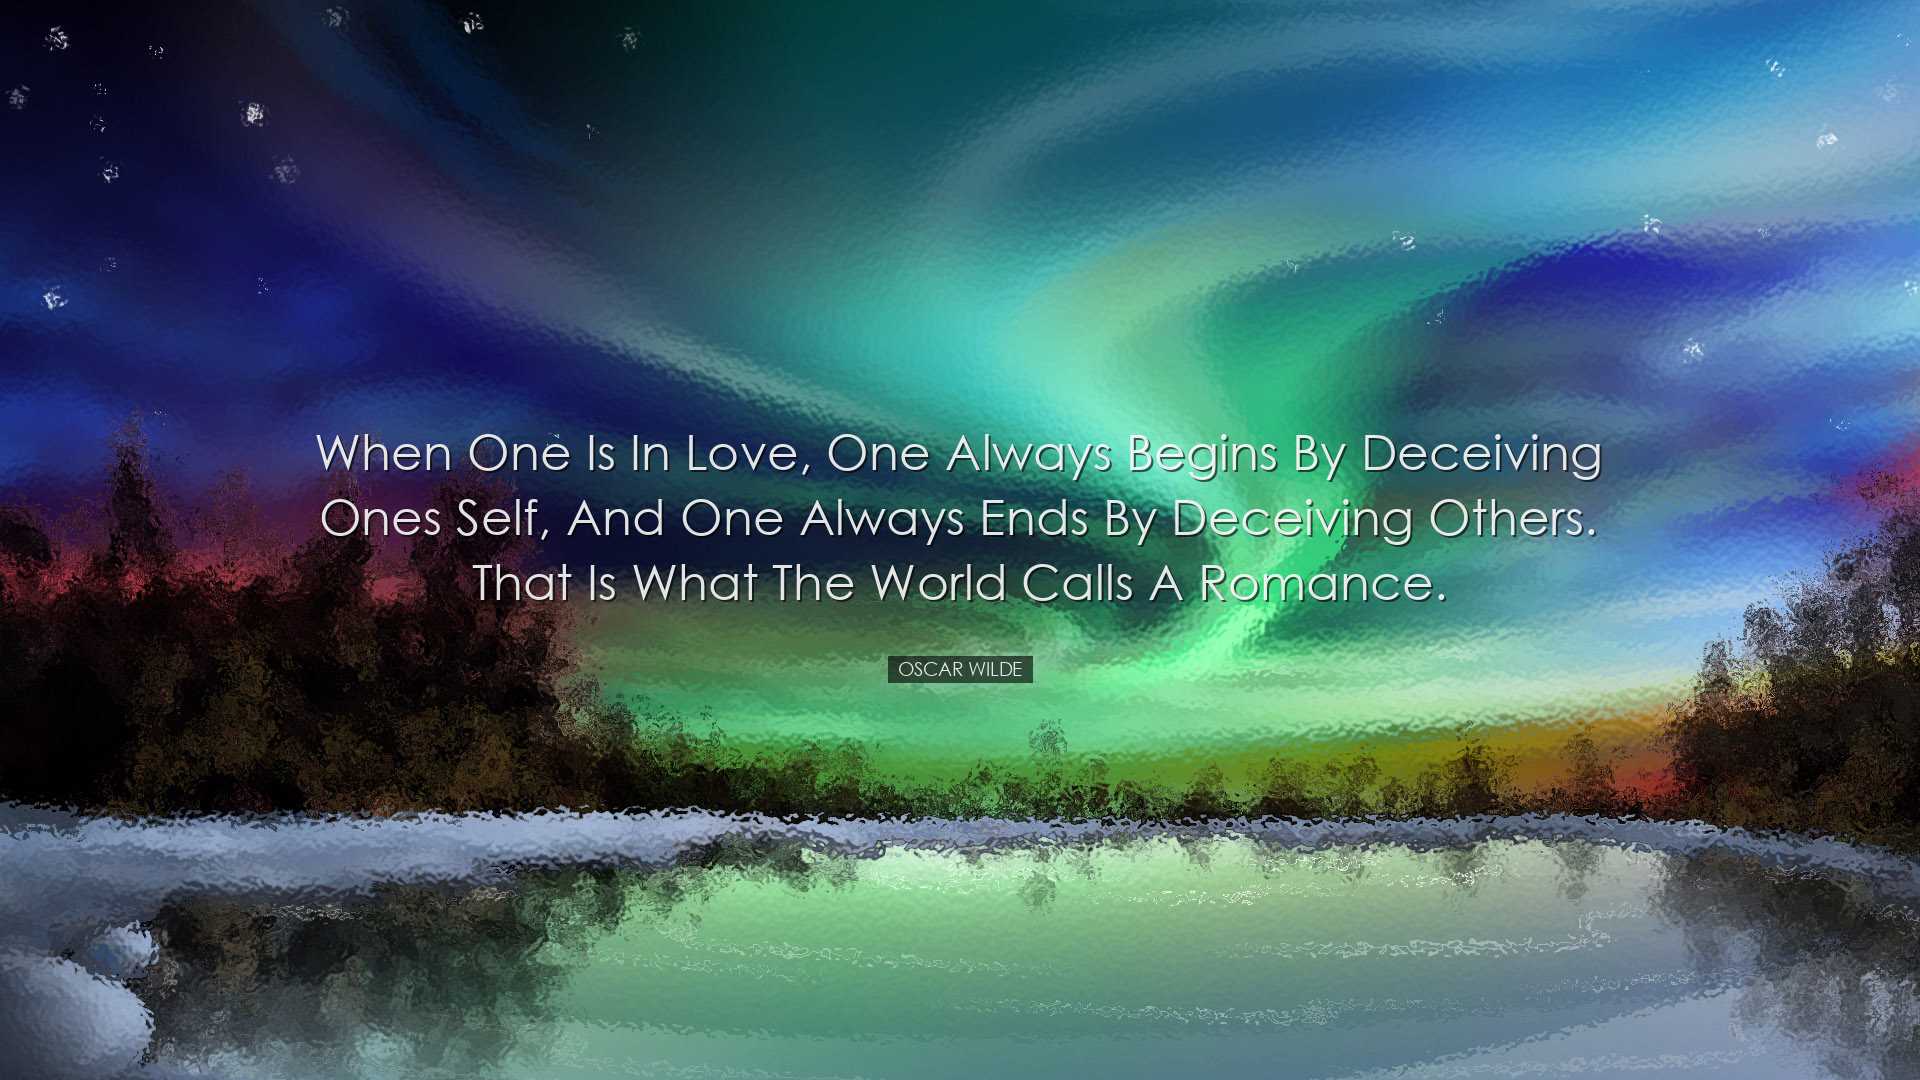 When one is in love, one always begins by deceiving ones self, and